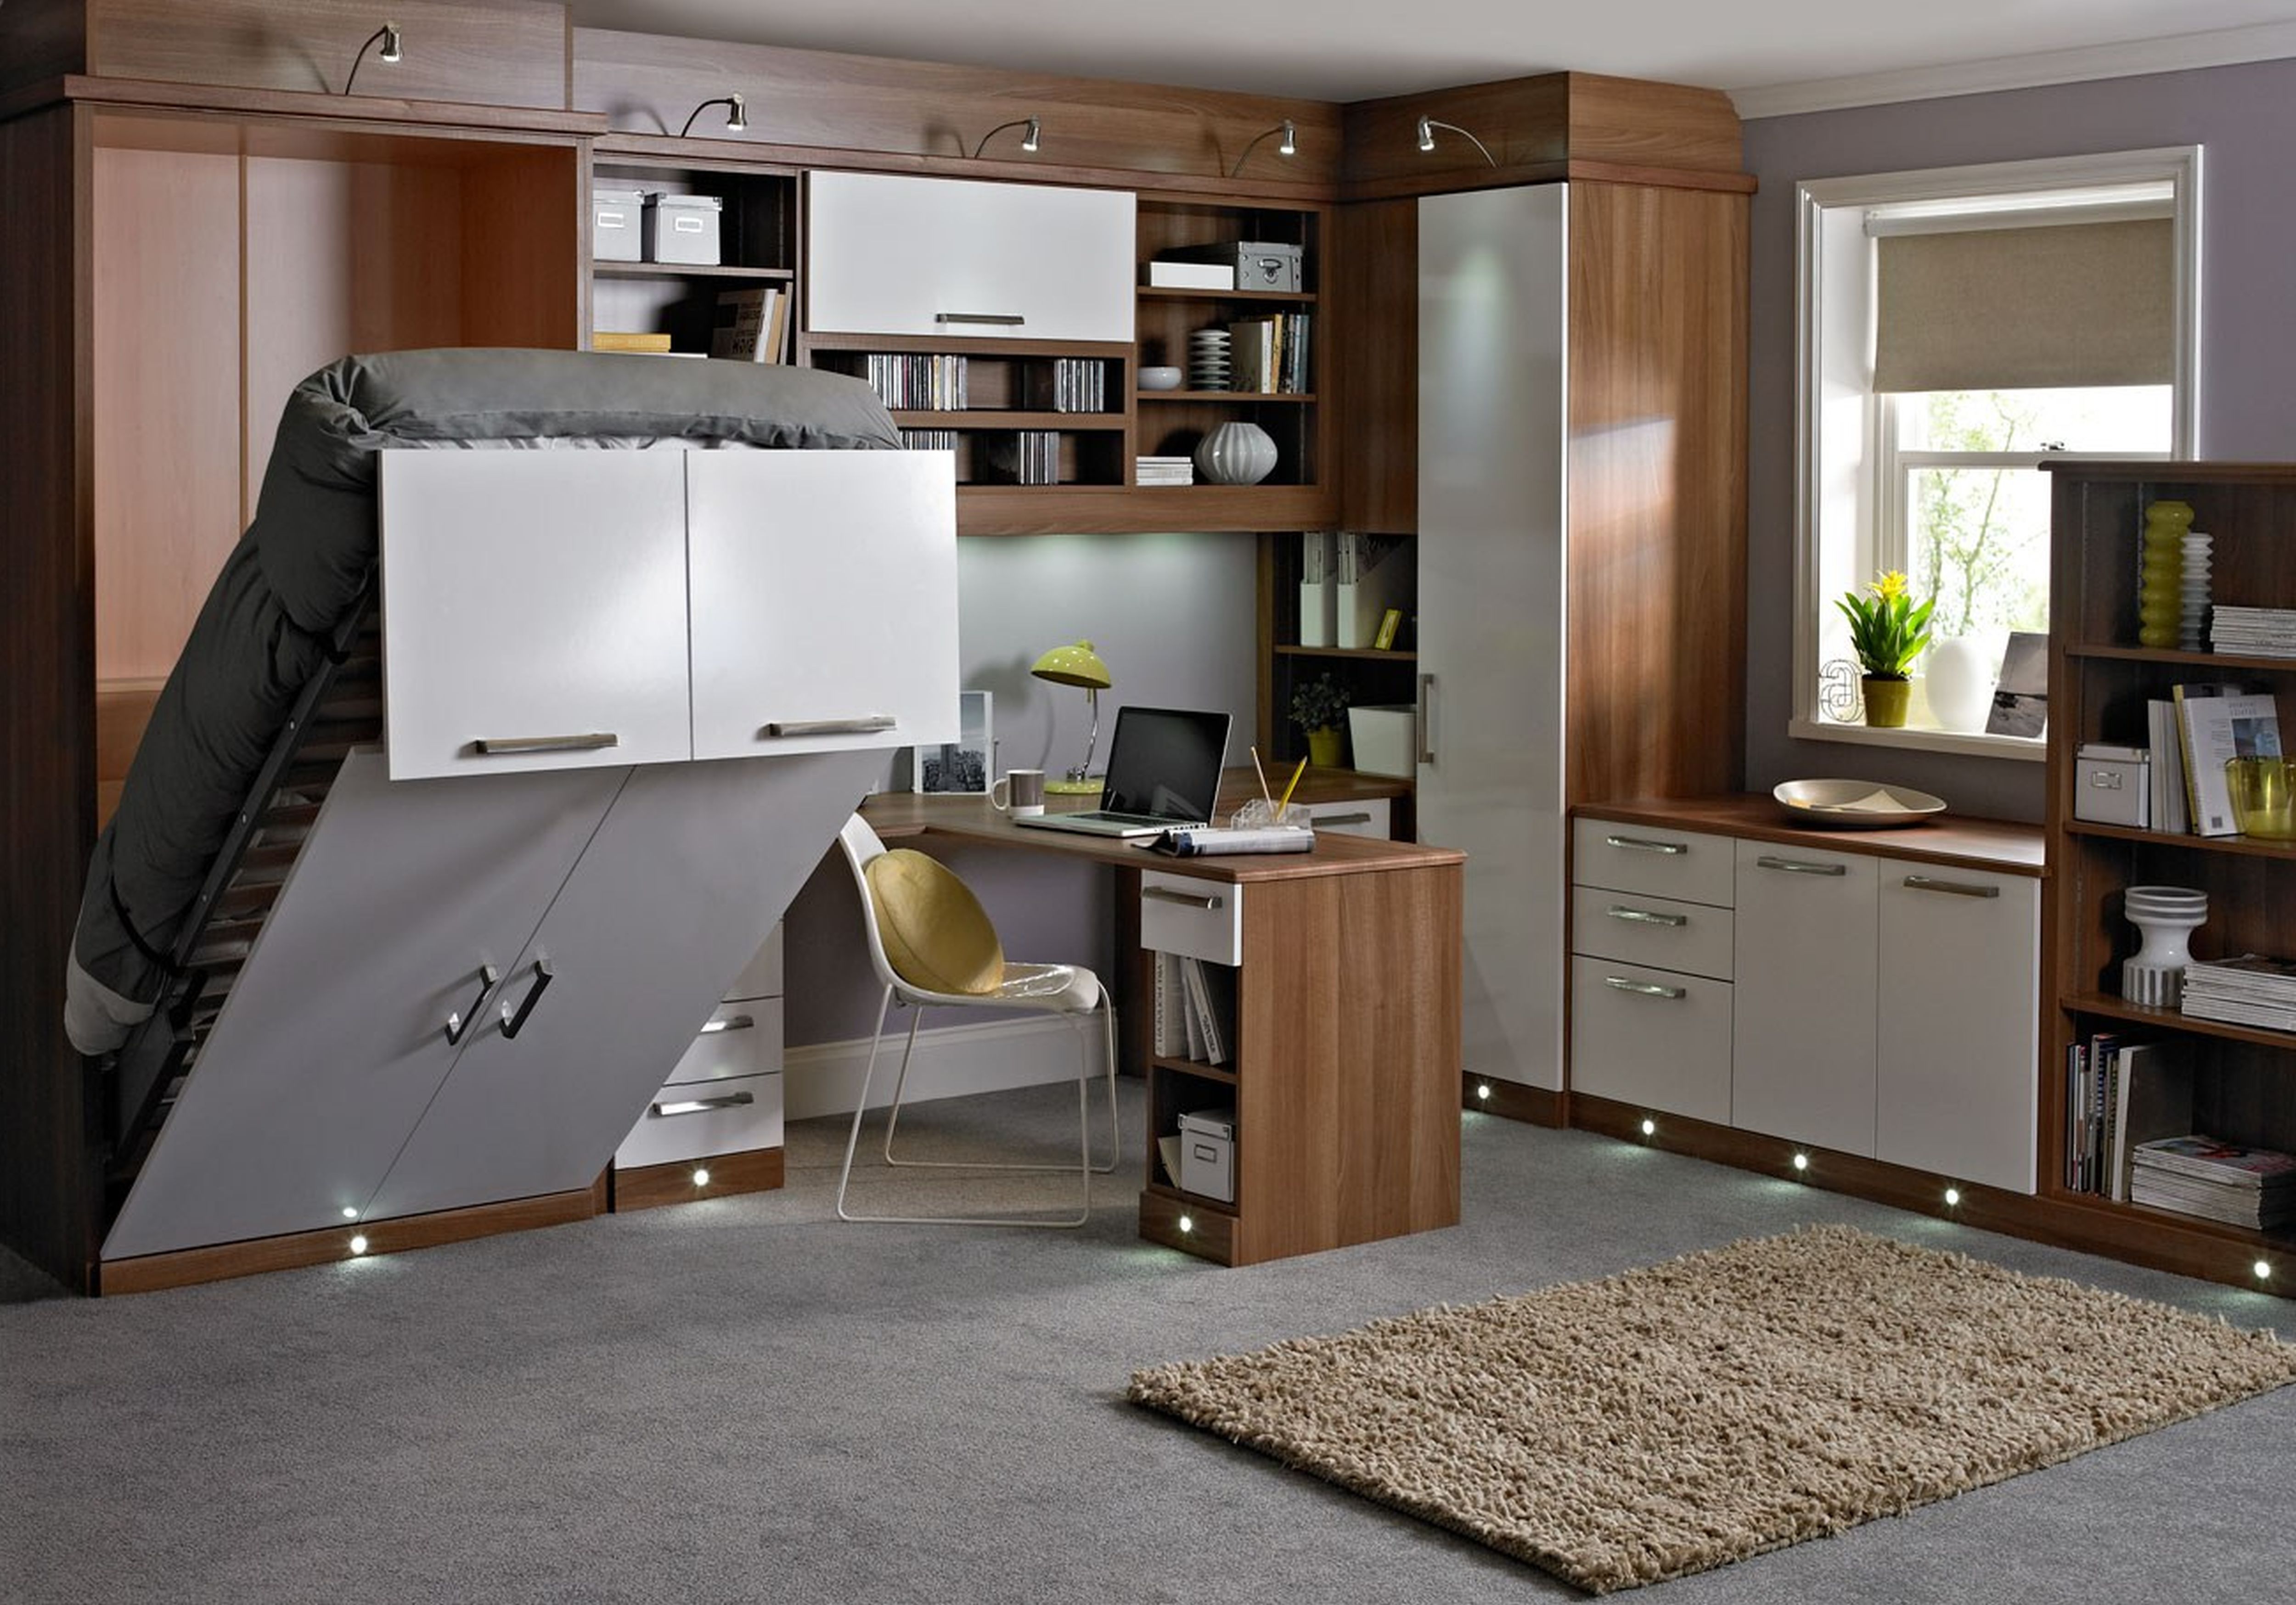 Multifunctional Furniture Design: Maximizing Space And Functionality